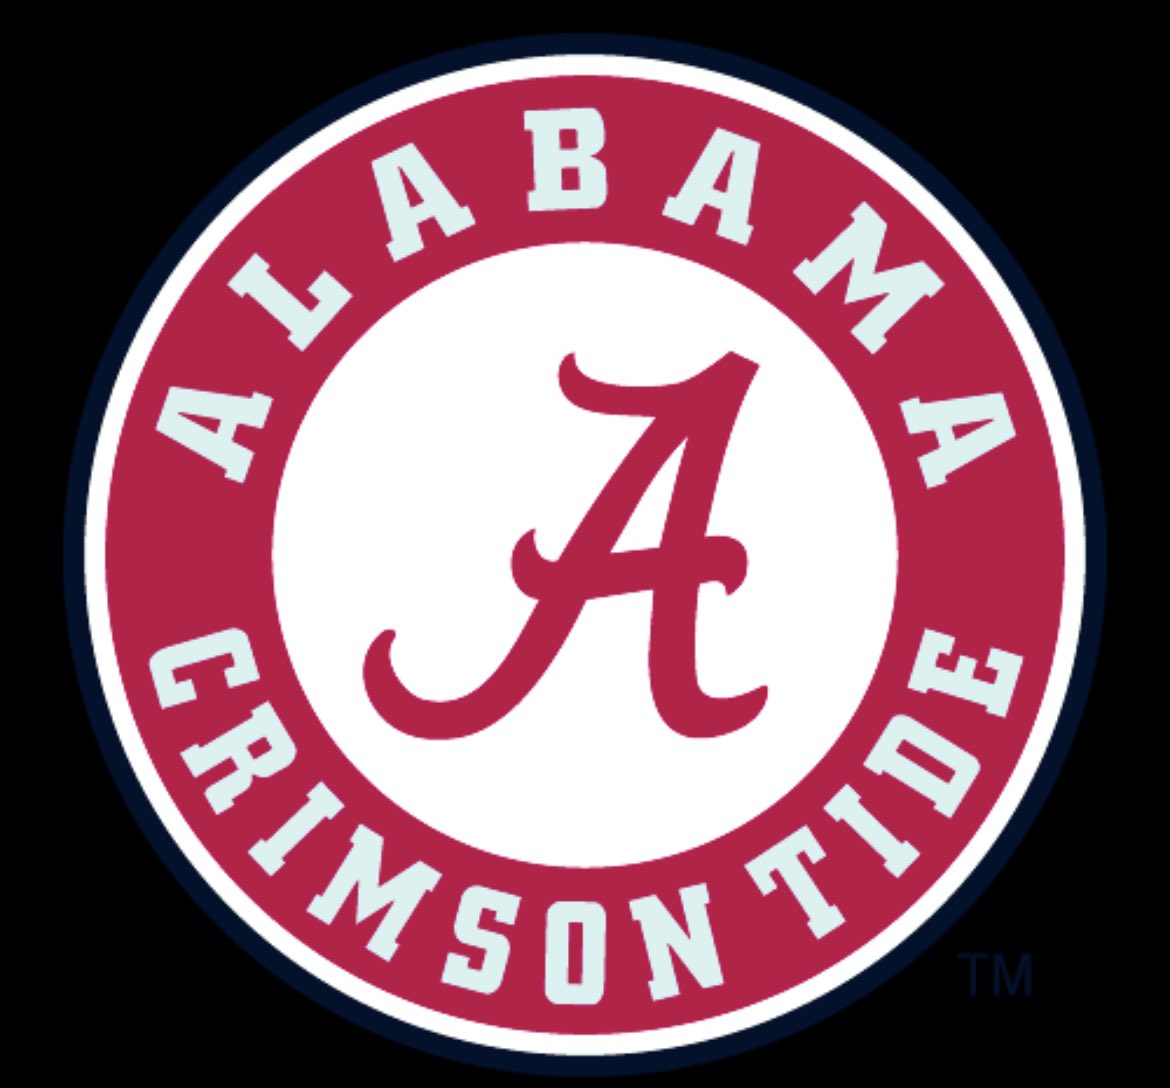 Blessed to have received an offer from the university of Alabama! Thank you Coach Wiggins and the rest of the coaching staff @HolmonWiggins @boscofootball @GregBiggins @adamgorney @ChadSimmons_ #RollTide